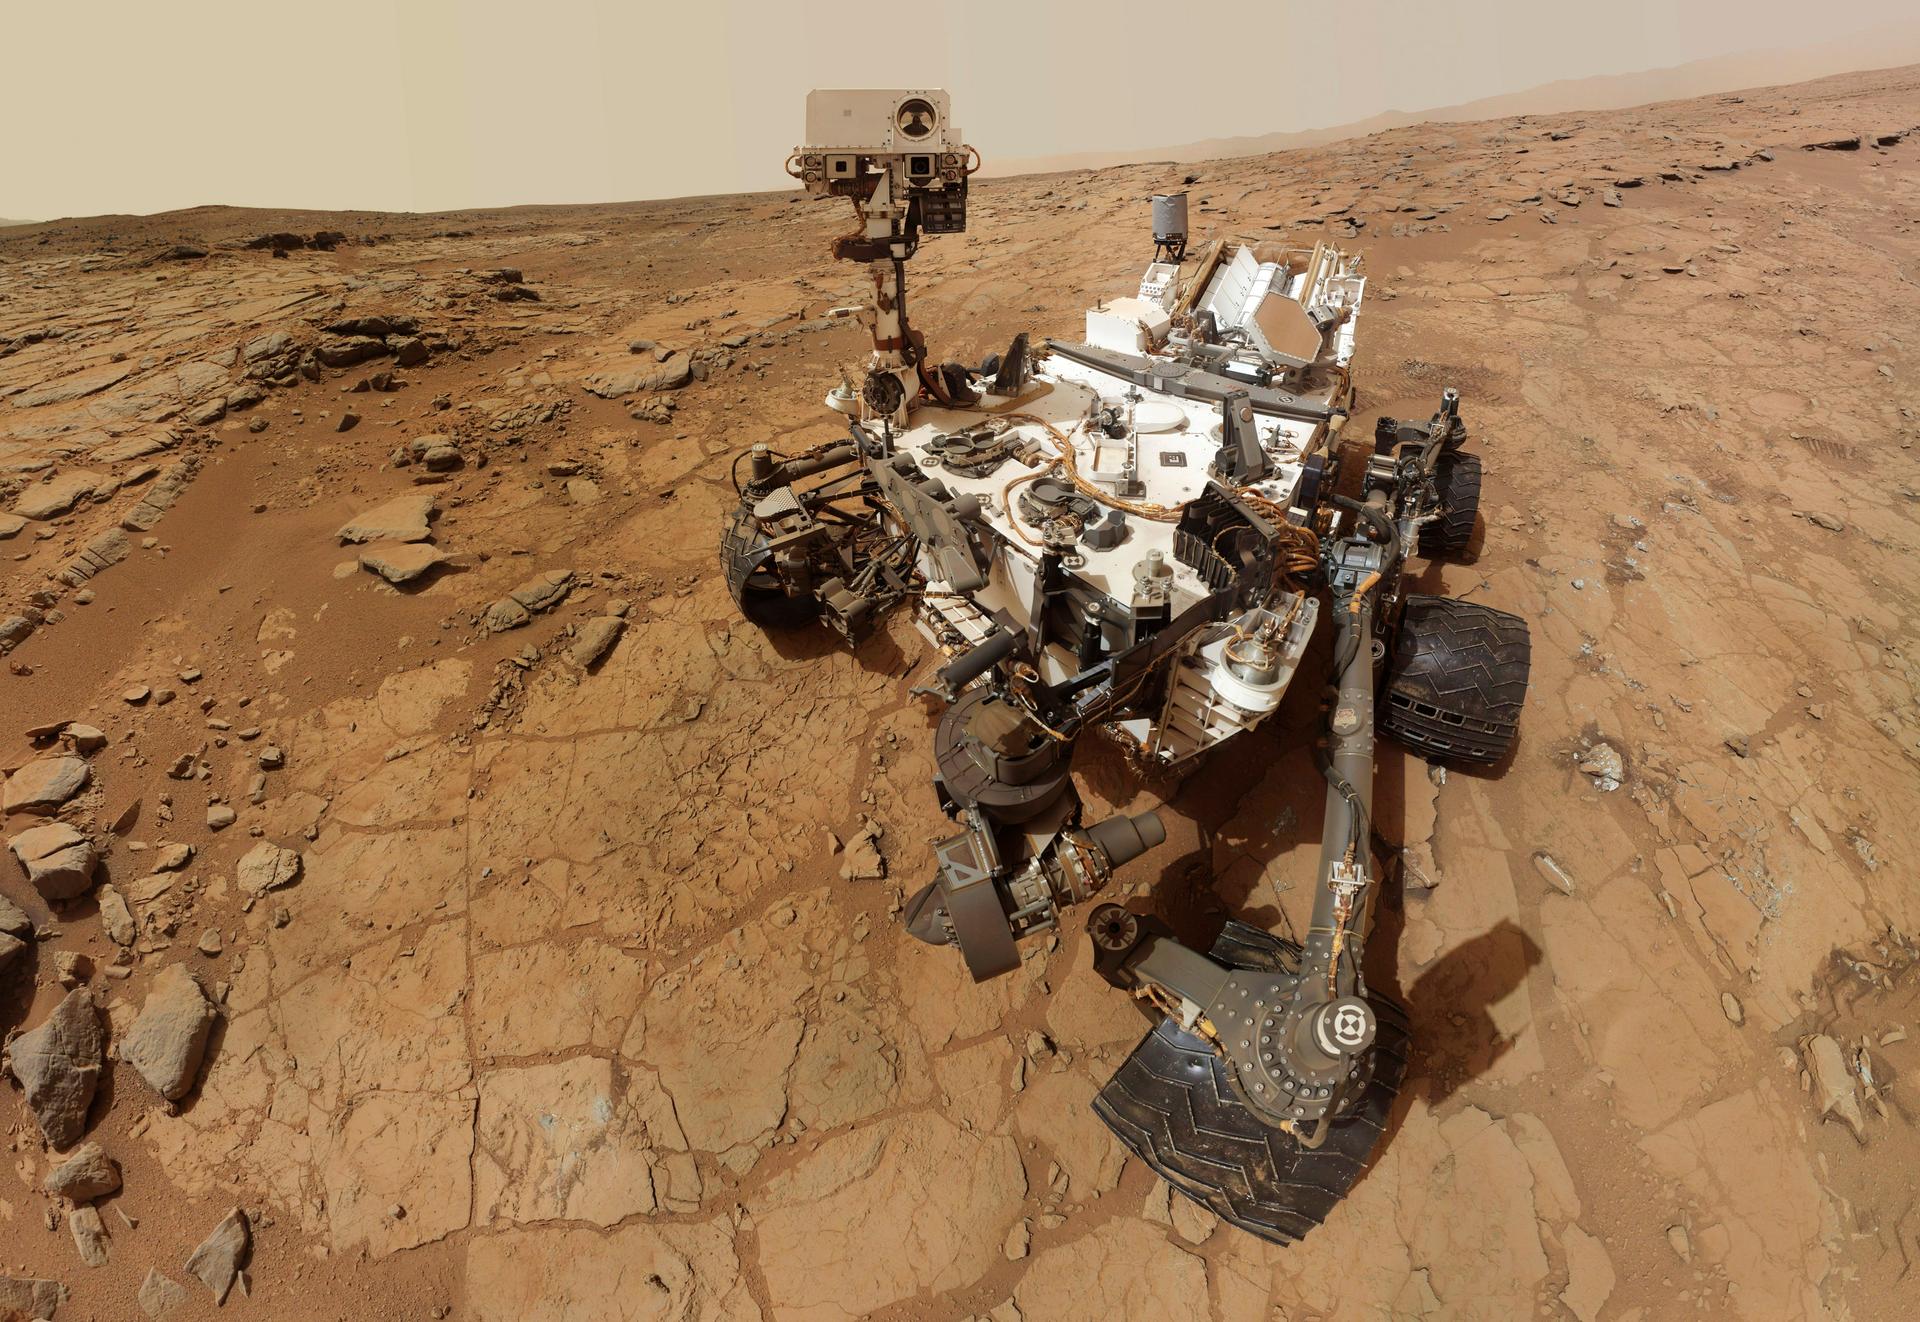 NASA's Mars rover, Curiosity, is pictured in this February 3, 2013 handout self-portrait.